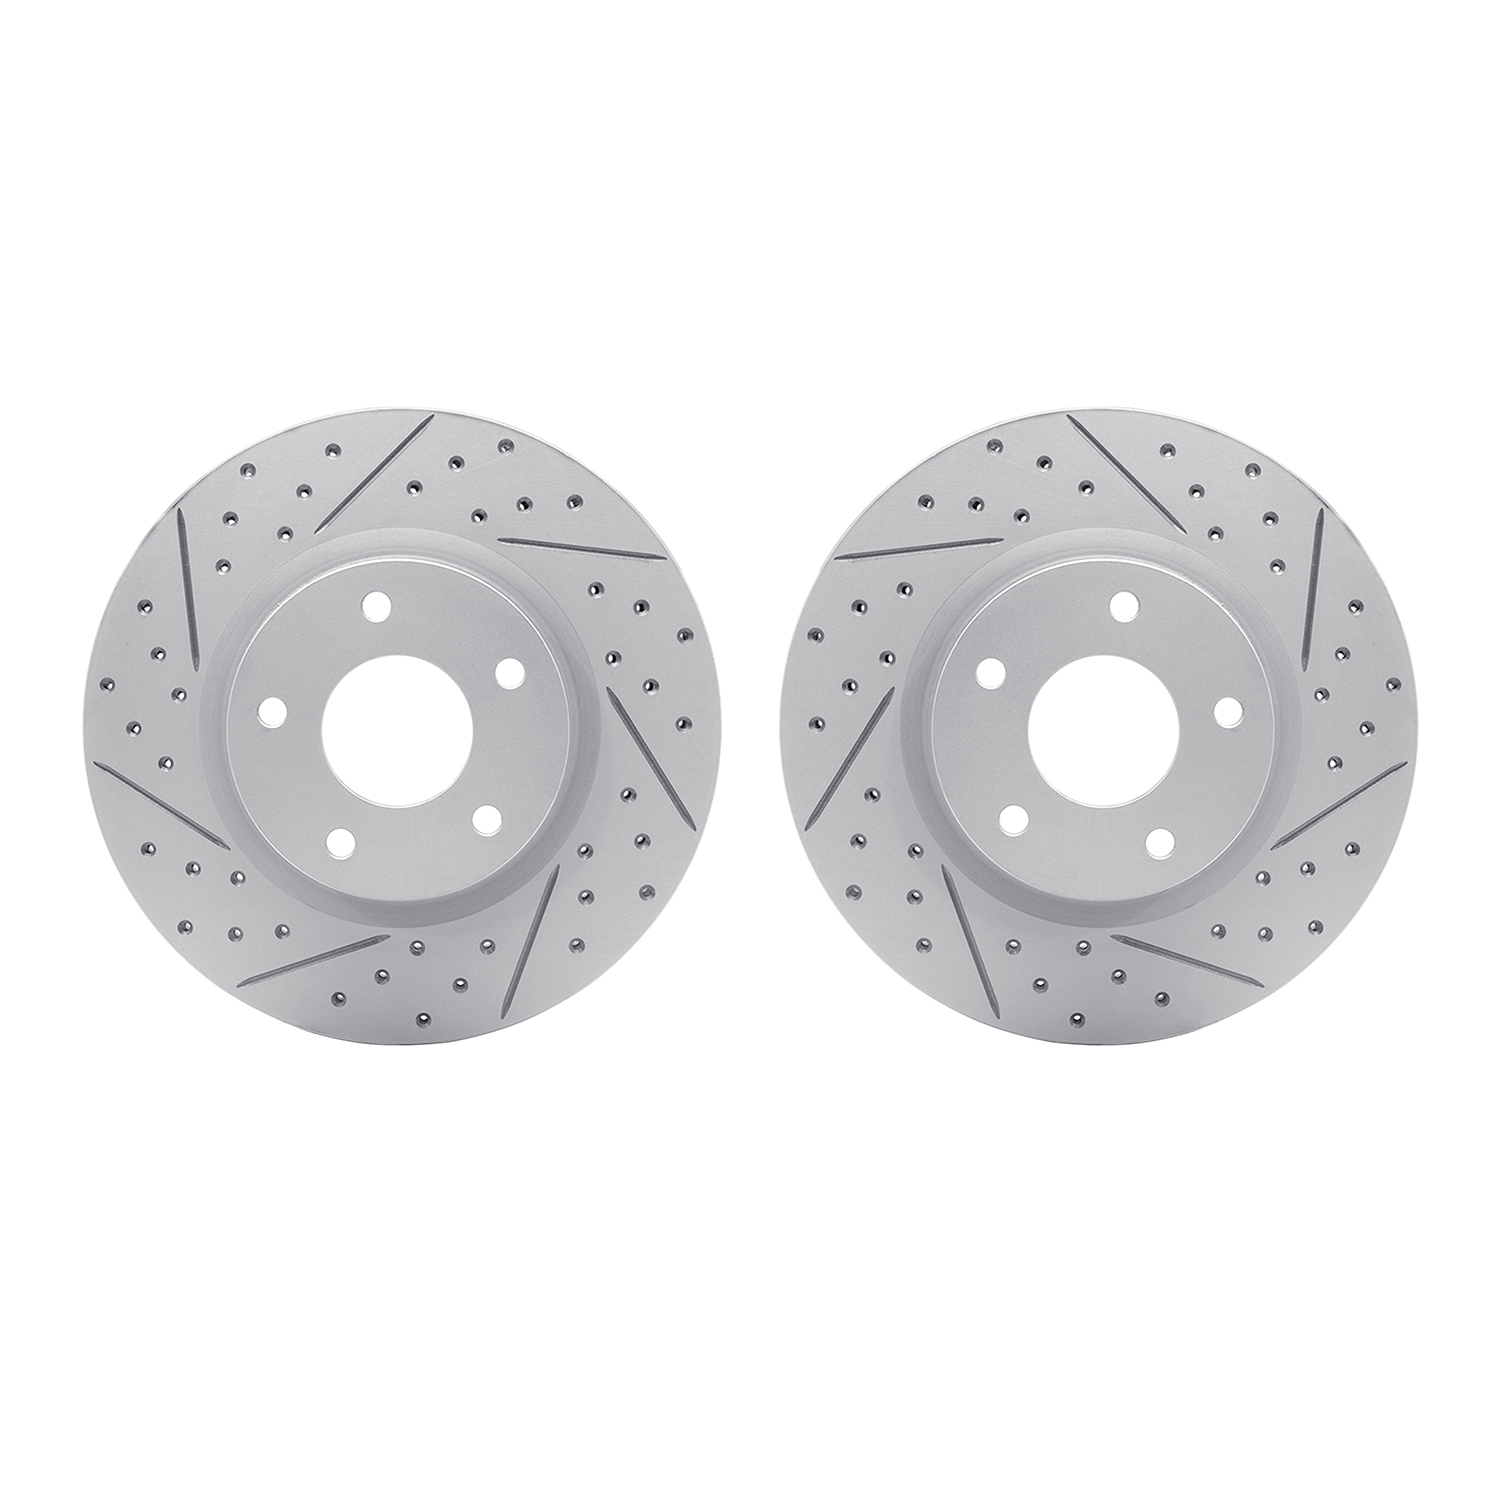 2002-67021 Geoperformance Drilled/Slotted Brake Rotors, Fits Select Infiniti/Nissan, Position: Front